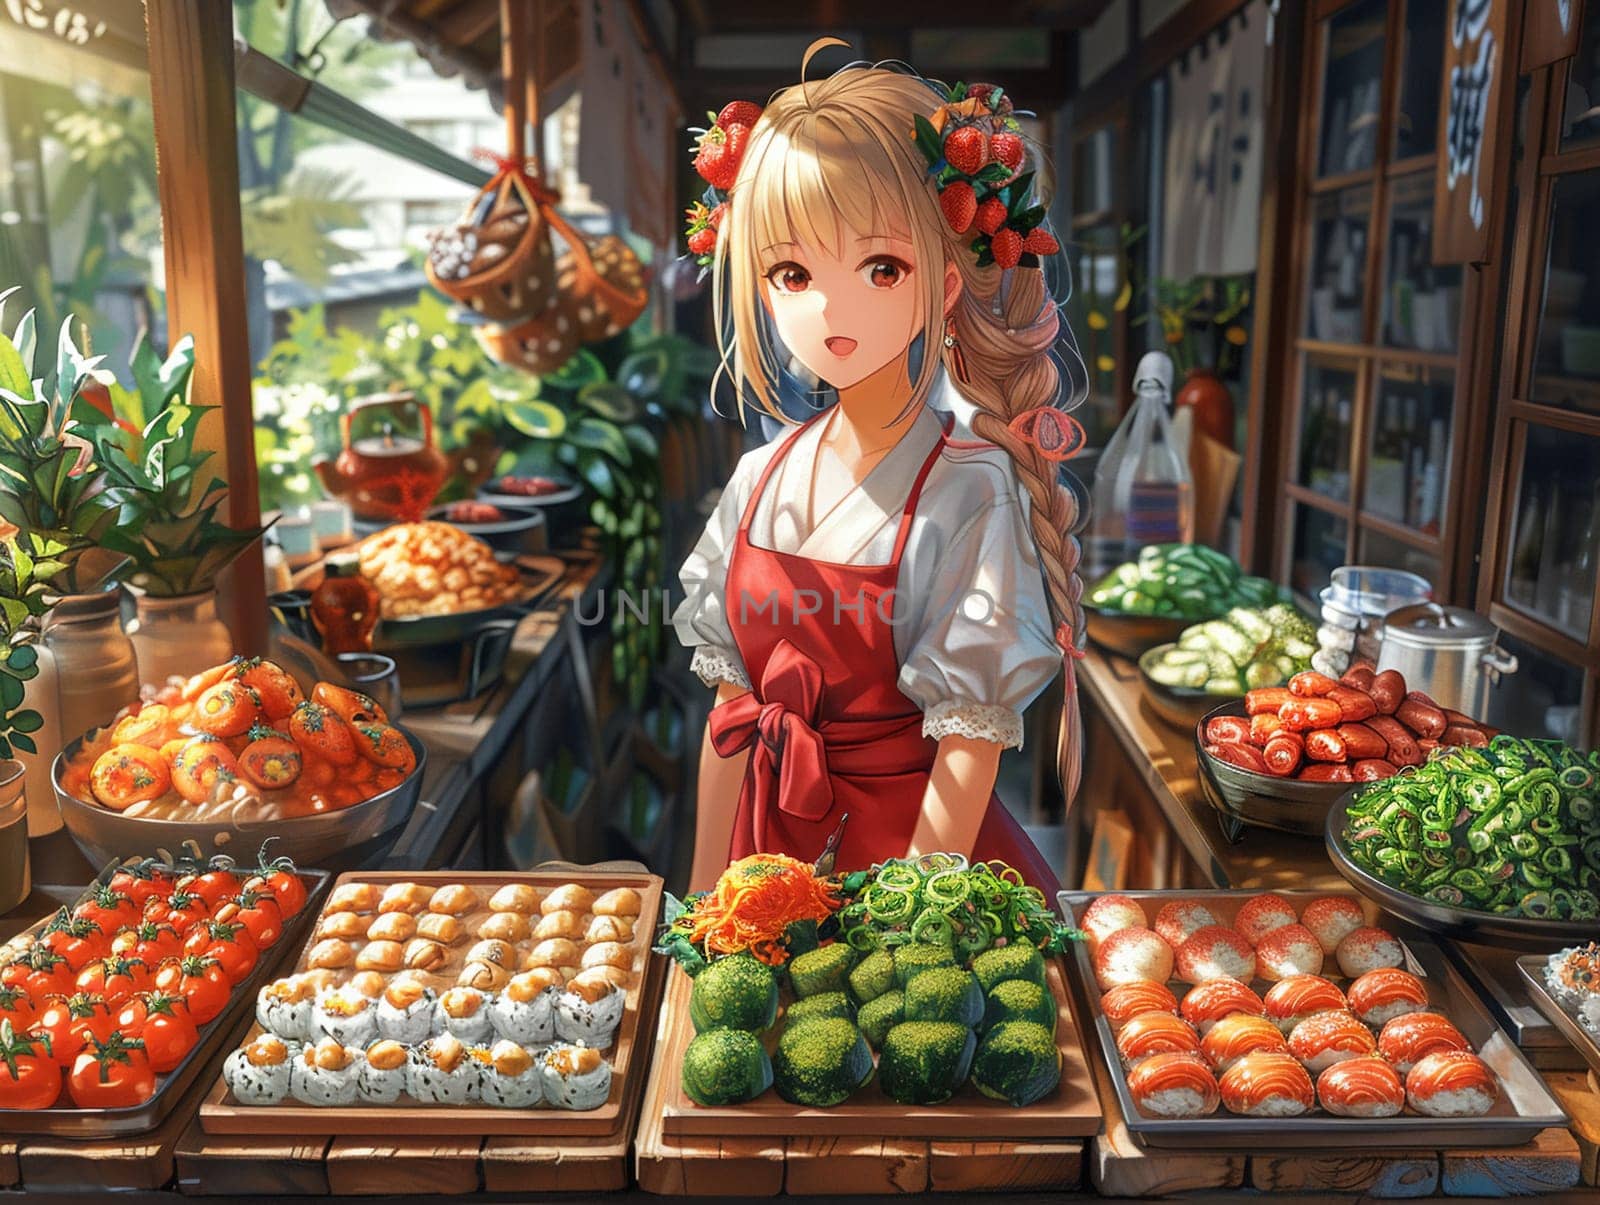 Food festival in anime style, showcasing a feast of illustrated delights and treats.